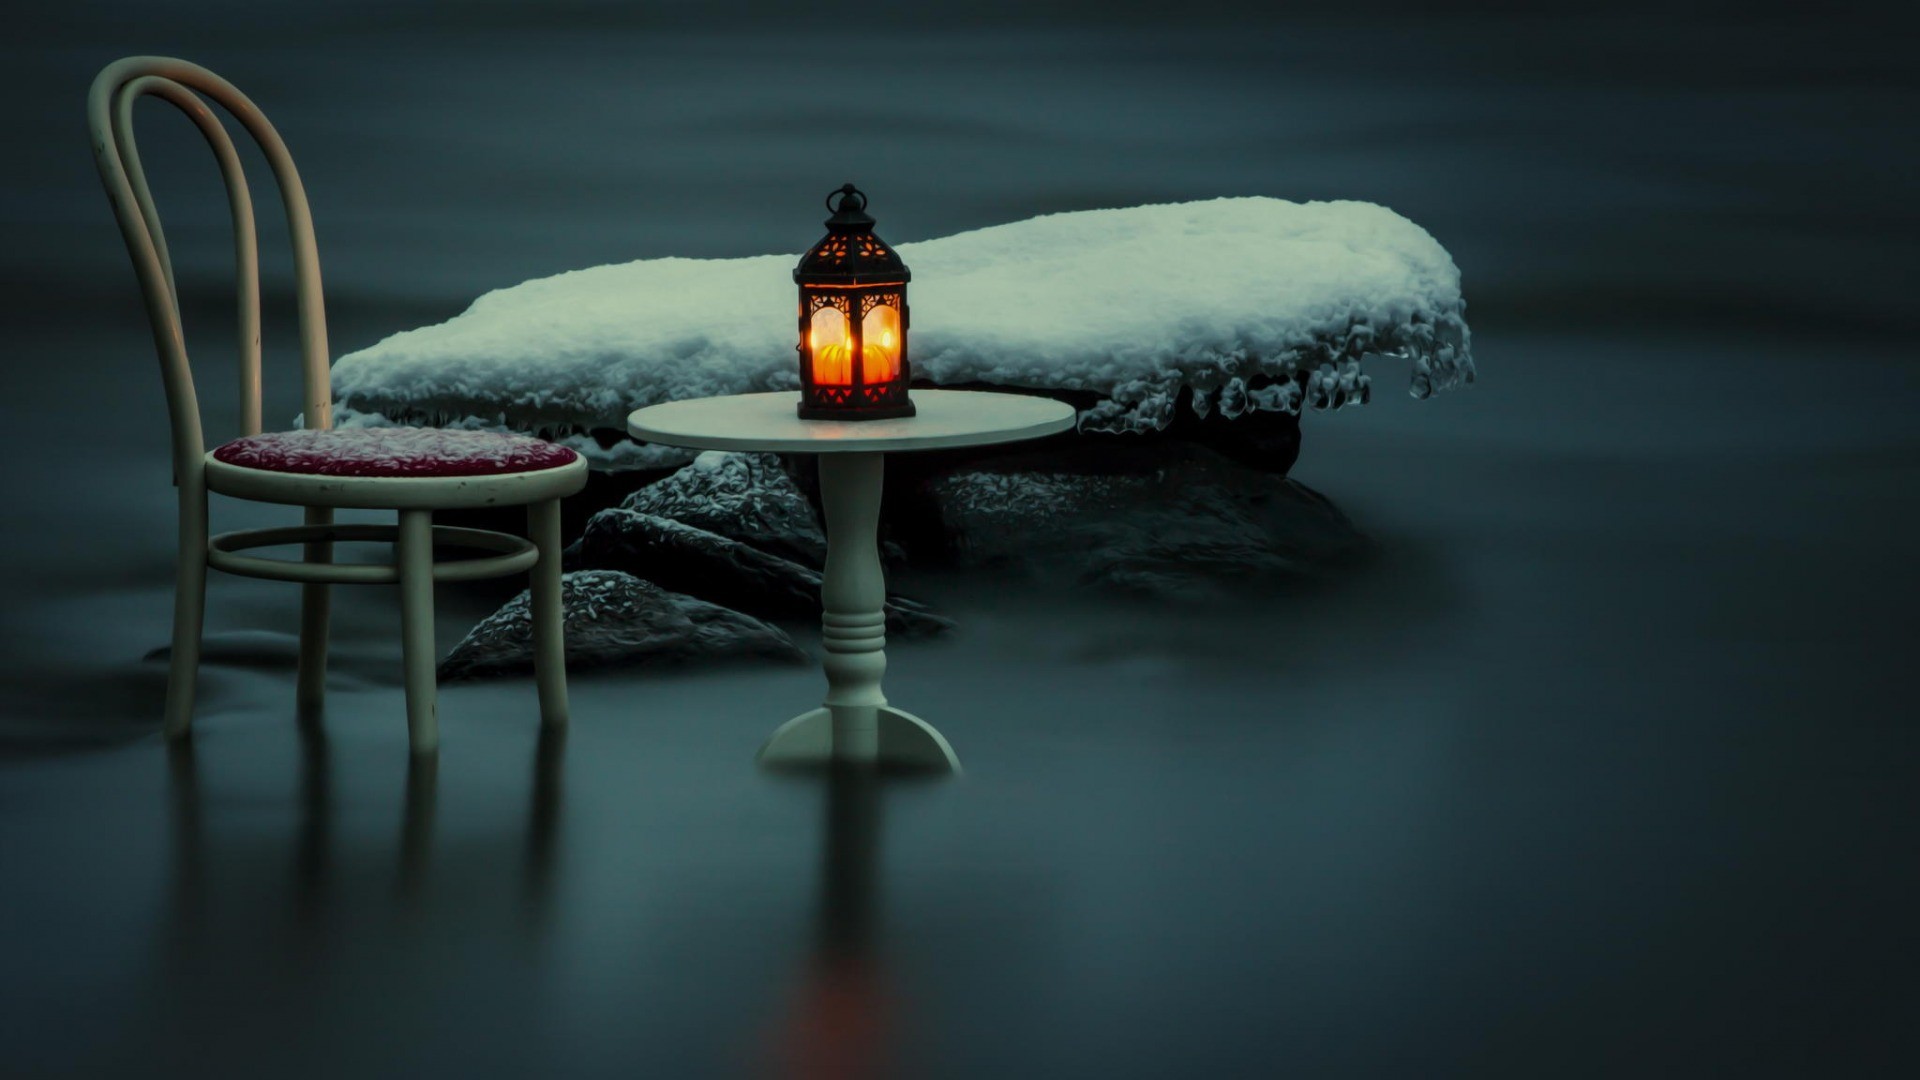 General 1920x1080 photography artwork nature water snow winter rocks stones table chair ice icicle lantern lamp blurred reflection long exposure candles